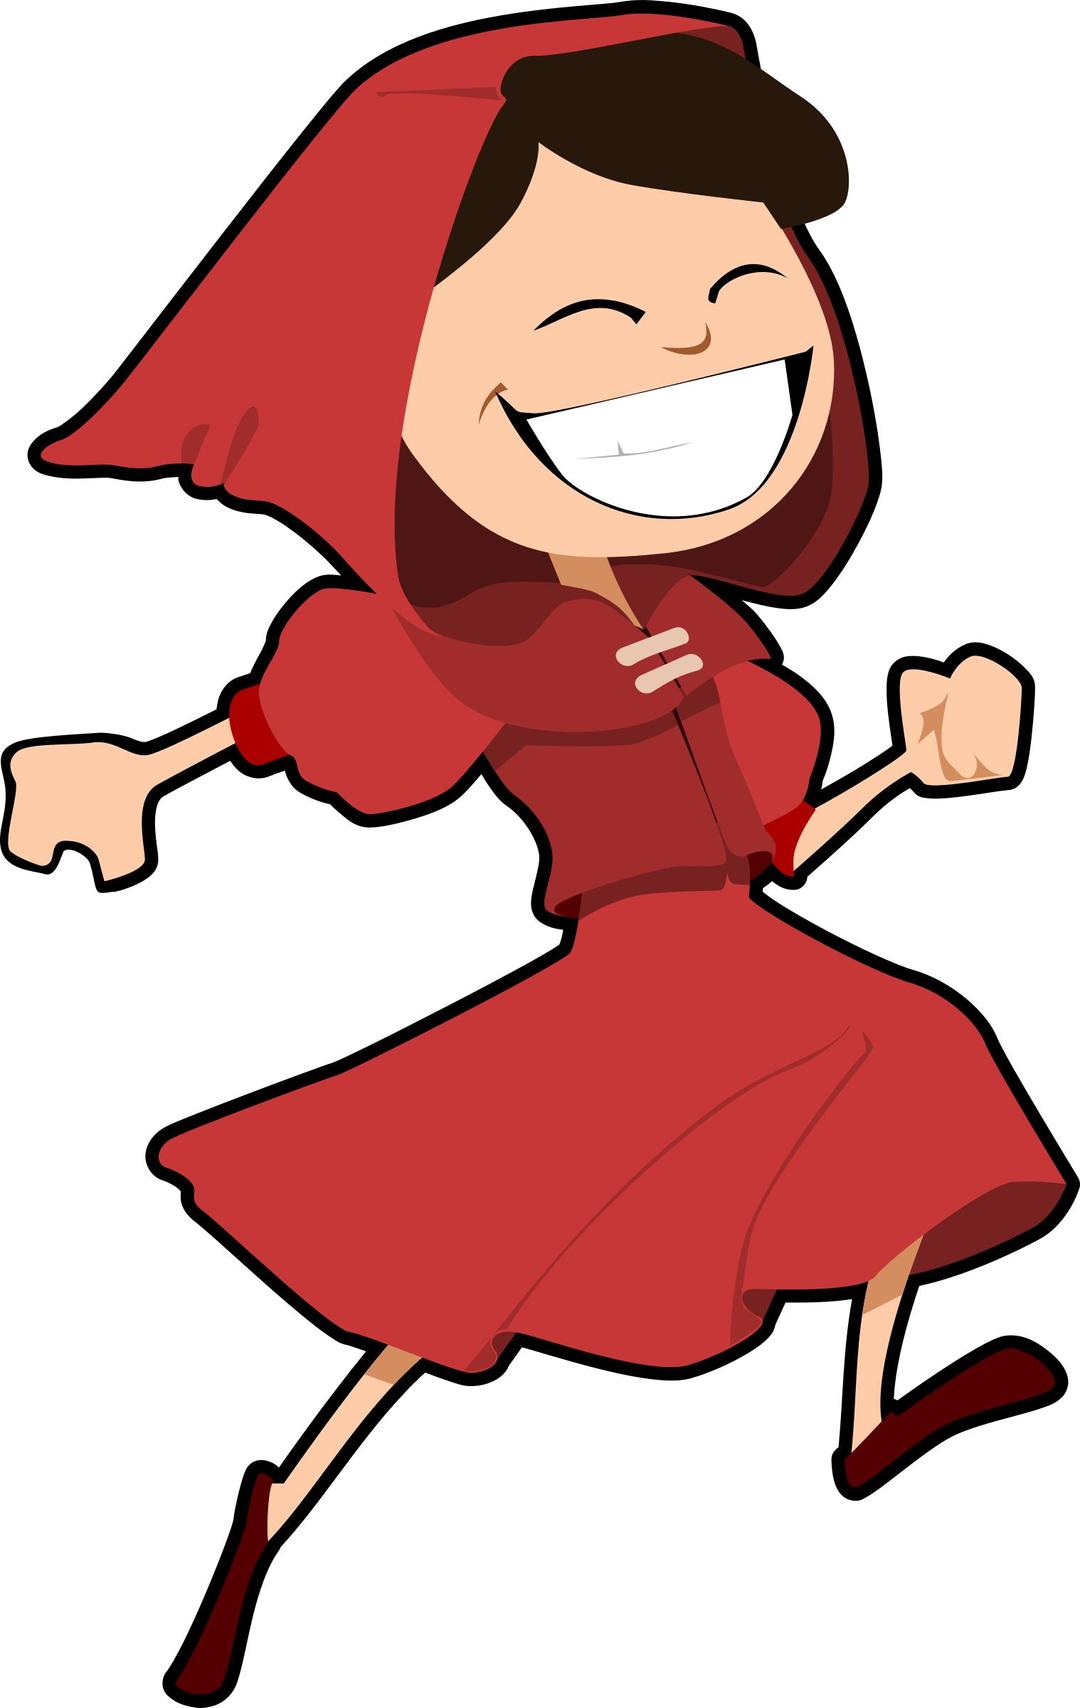 Jumping Girl Dressed in Red png transparent